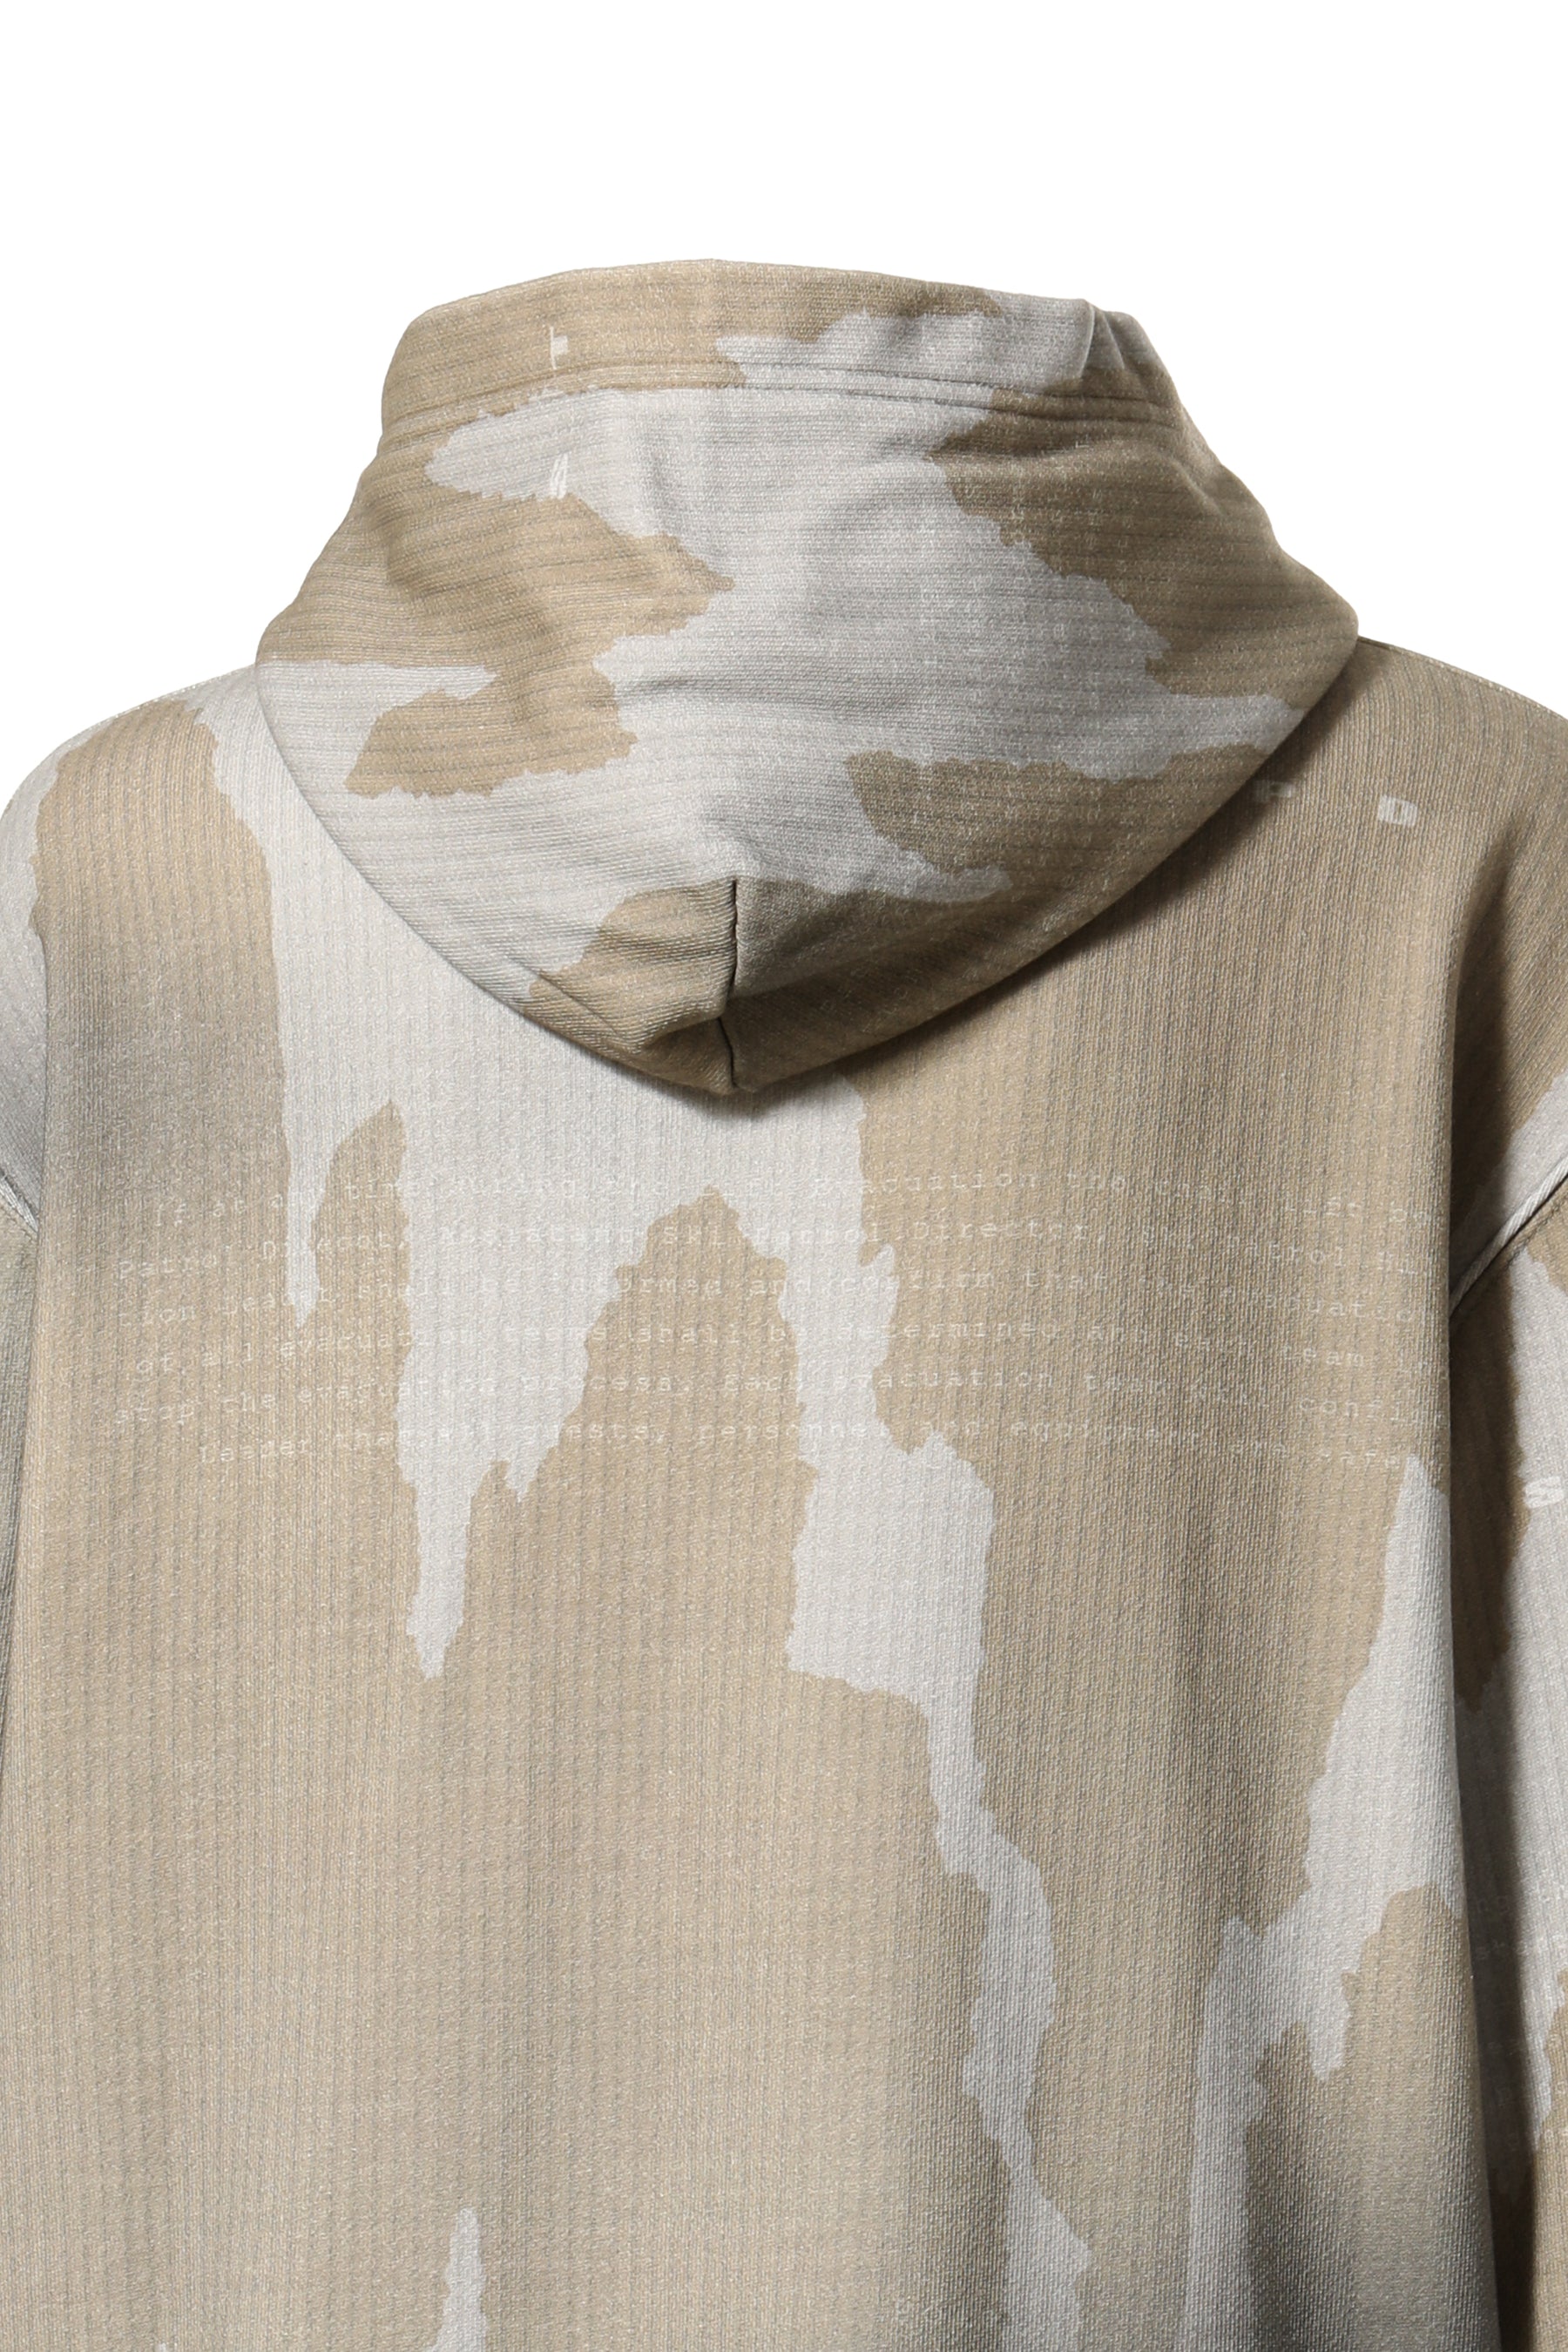 STAMPD IKAT CAMO CROPPED HOODIE / IKC